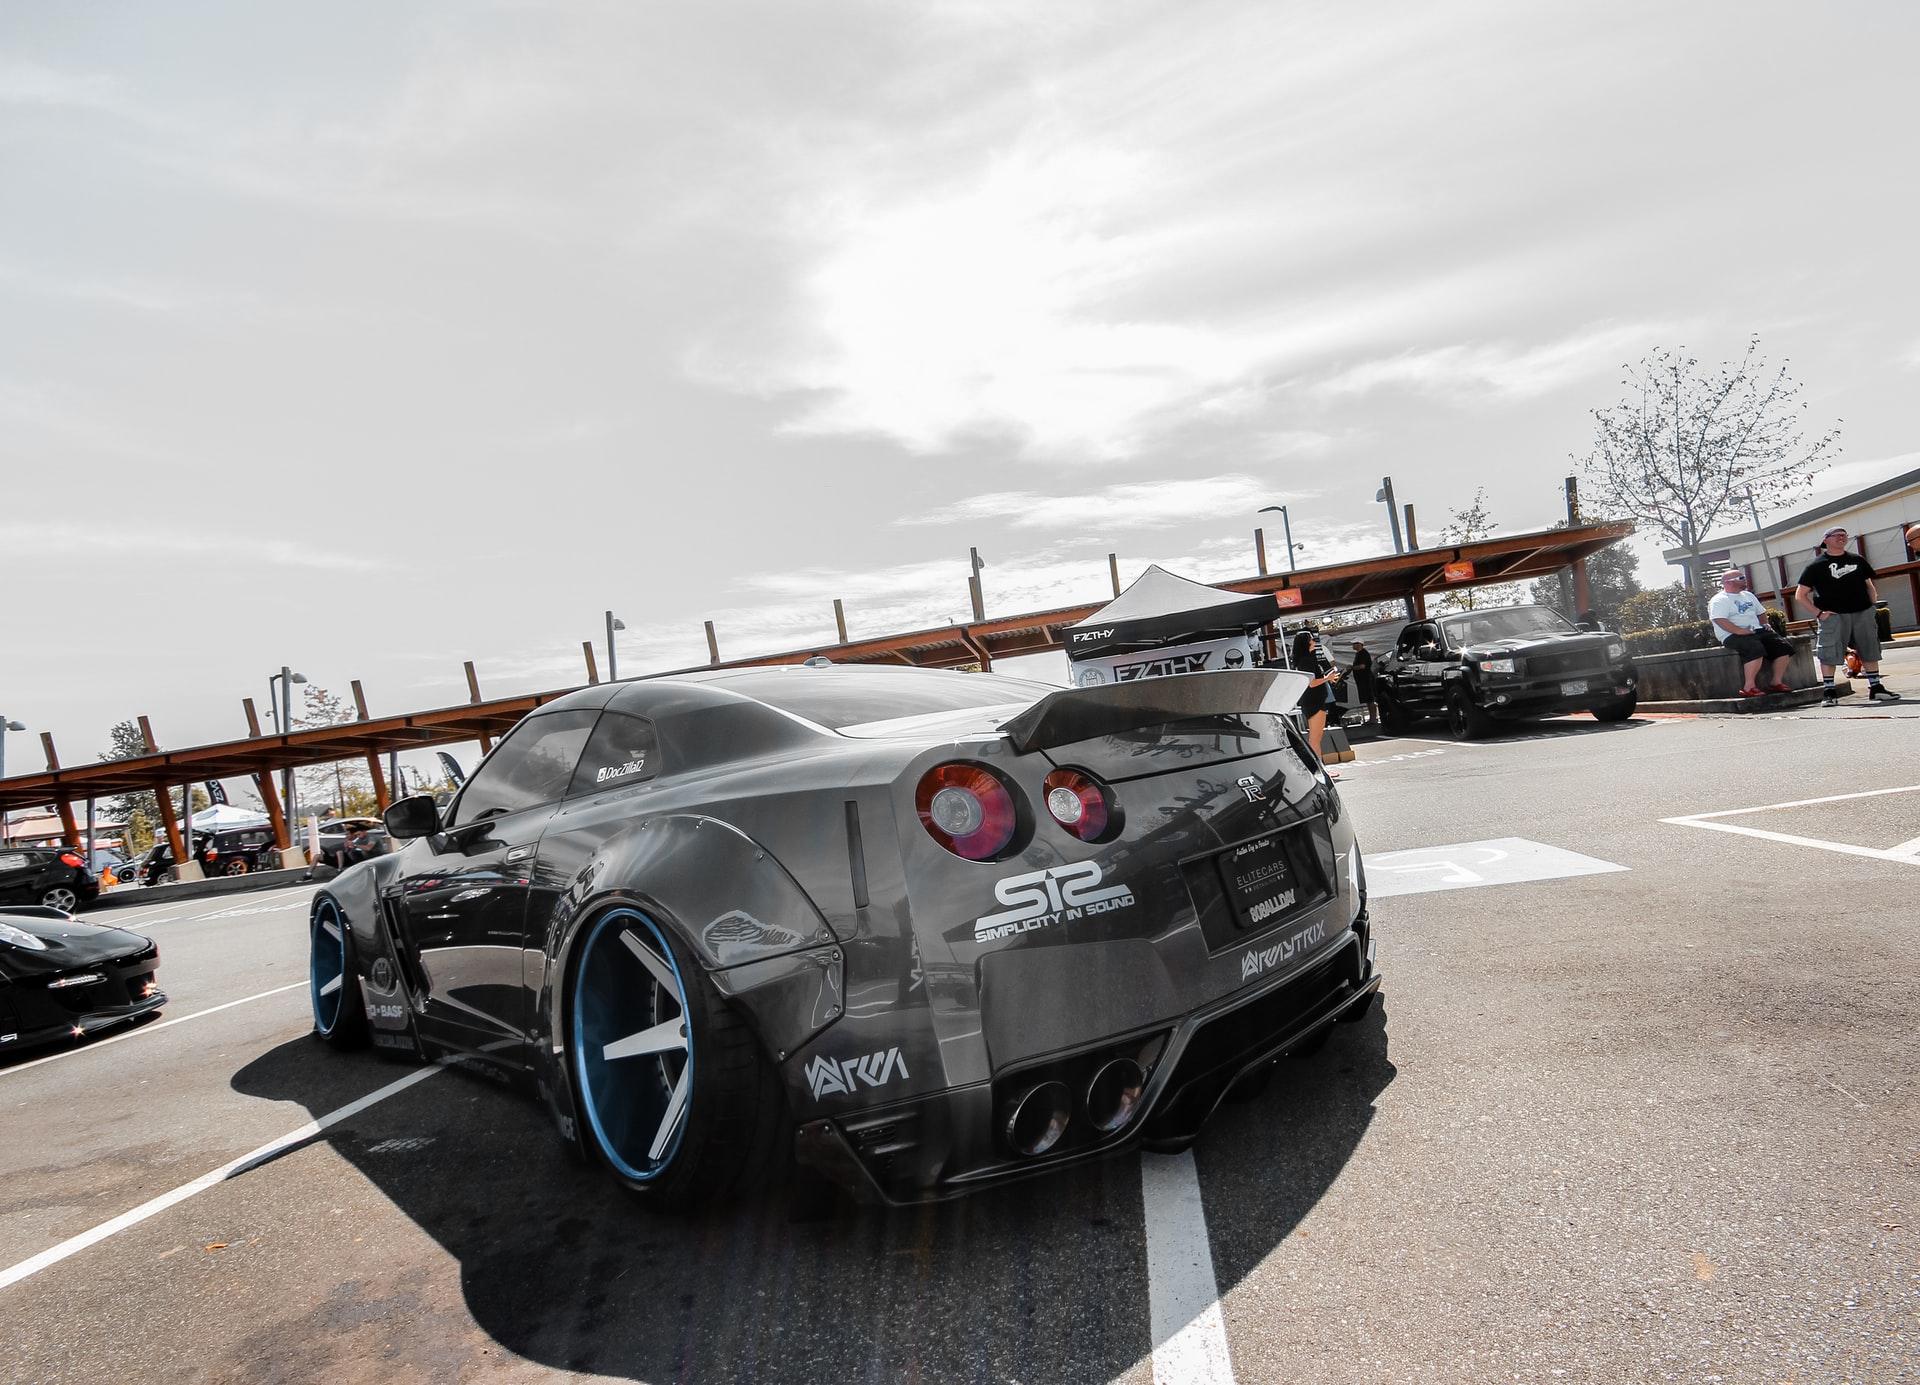 The next iteration of the legendary Nissan GT-R family is announced, the R36.